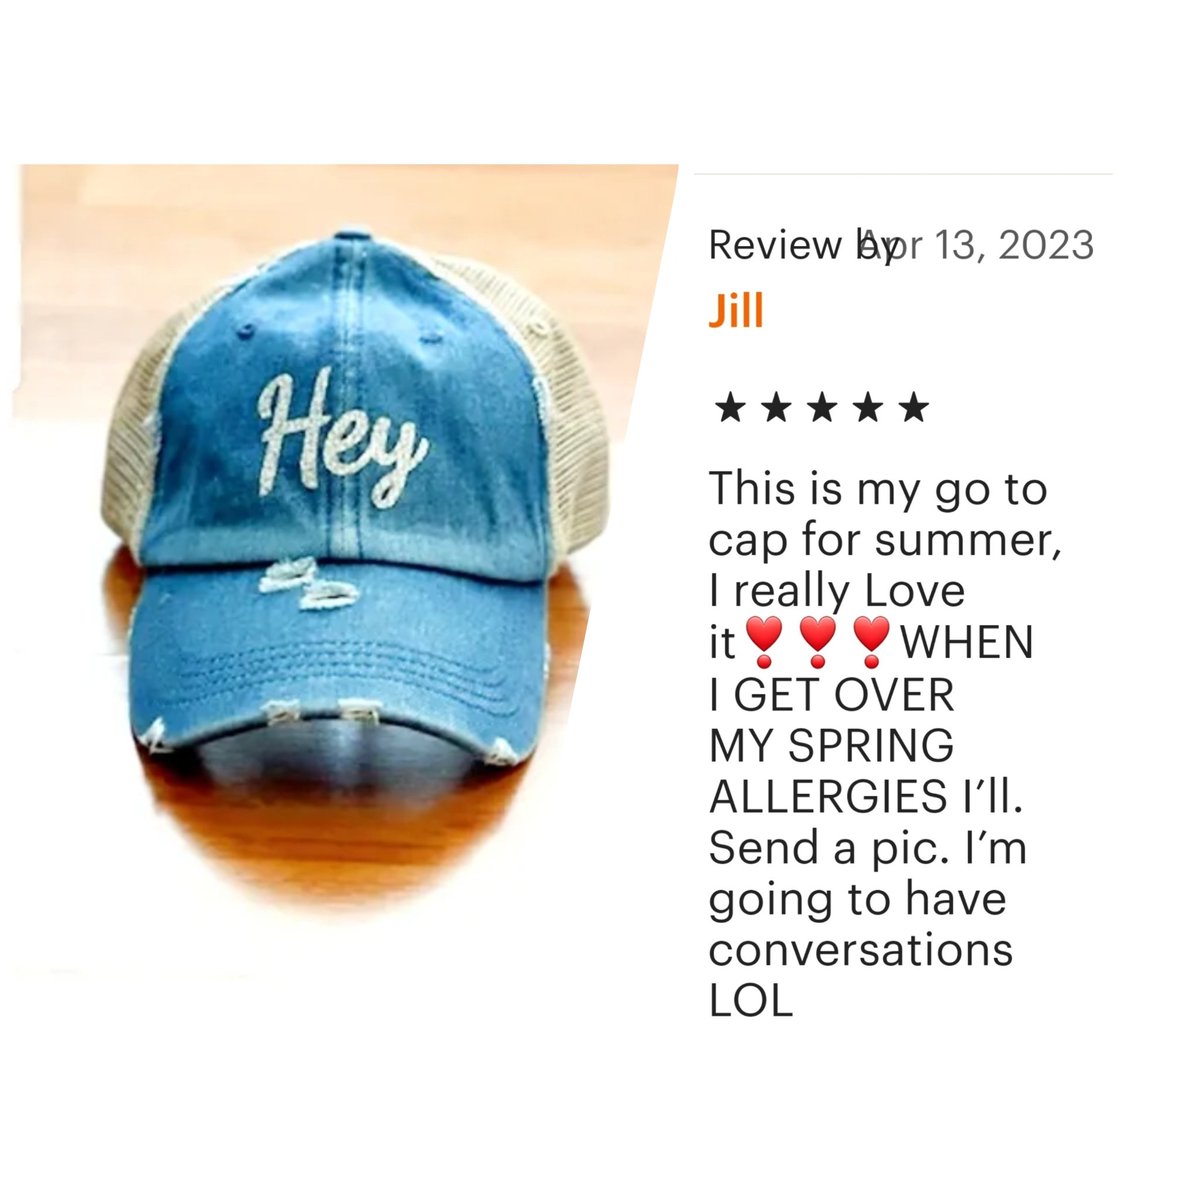 Another happy customer🗣
Avail in denim, navy& white. Get your 'HEY' Vintage Trucker hat on heygirlietravel.com/product-page/v…
#heygirlietravel #Hey   #vintagetruckerhat #truckerhat #hat #baseballcap #travelaccessories #petaccessories #heygirliecosmeticbag #personalalarm #tacticalpen